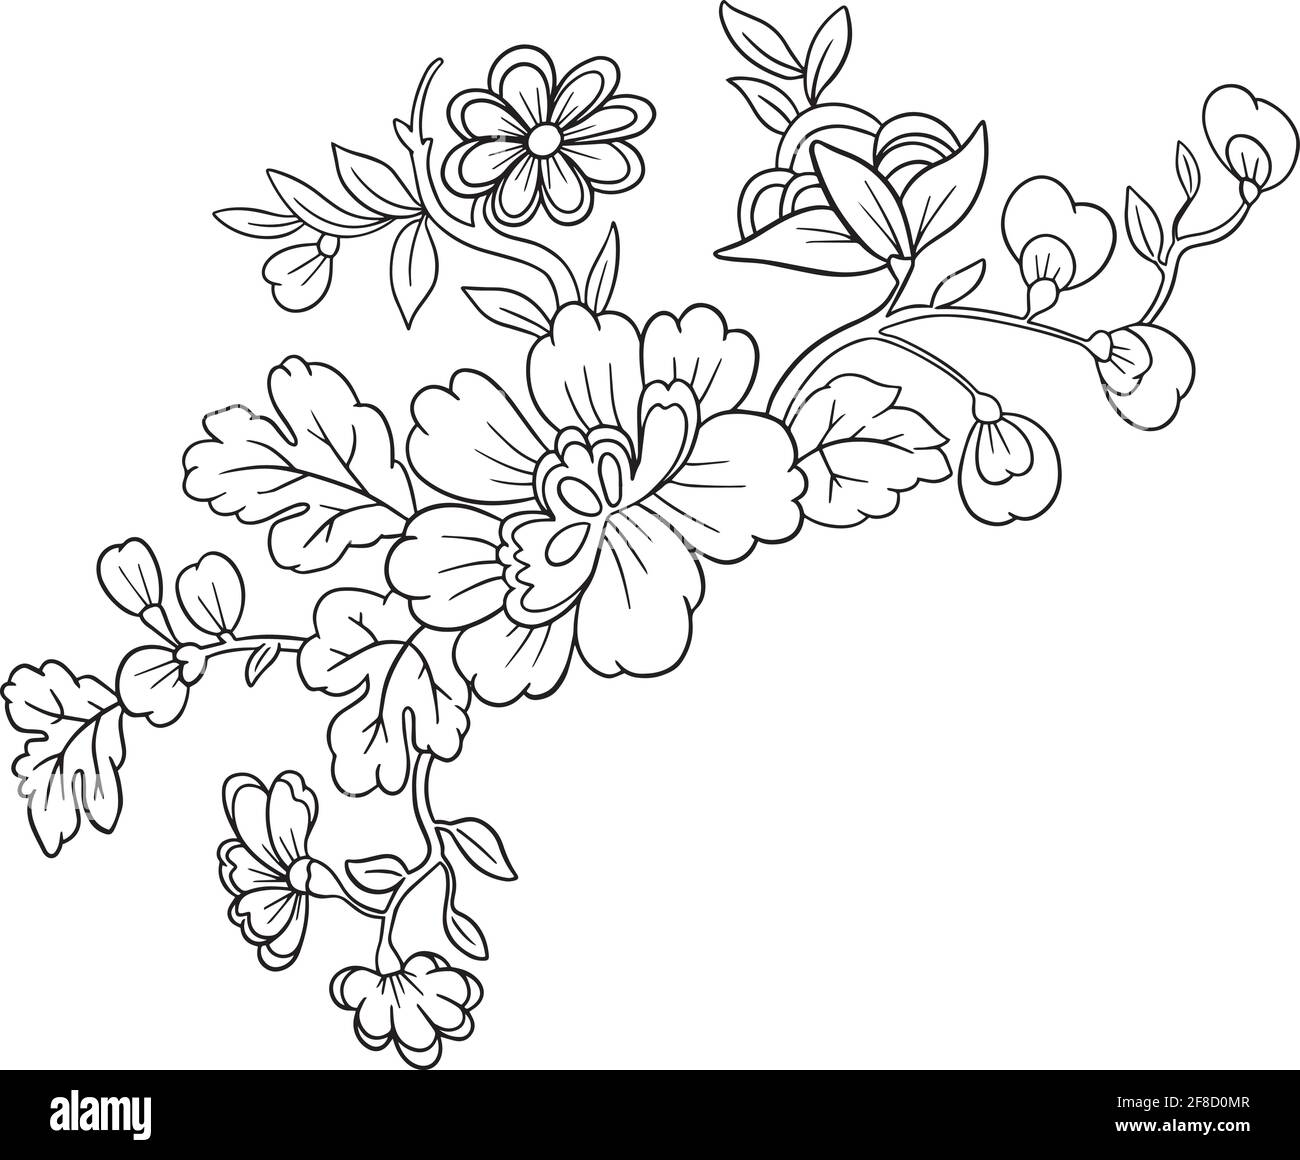 One Line Rose Illustration Minimalist Style Flower Tattoo Isolated Line  Floral Print Design Stock Vector  Illustration of label creative  187670948